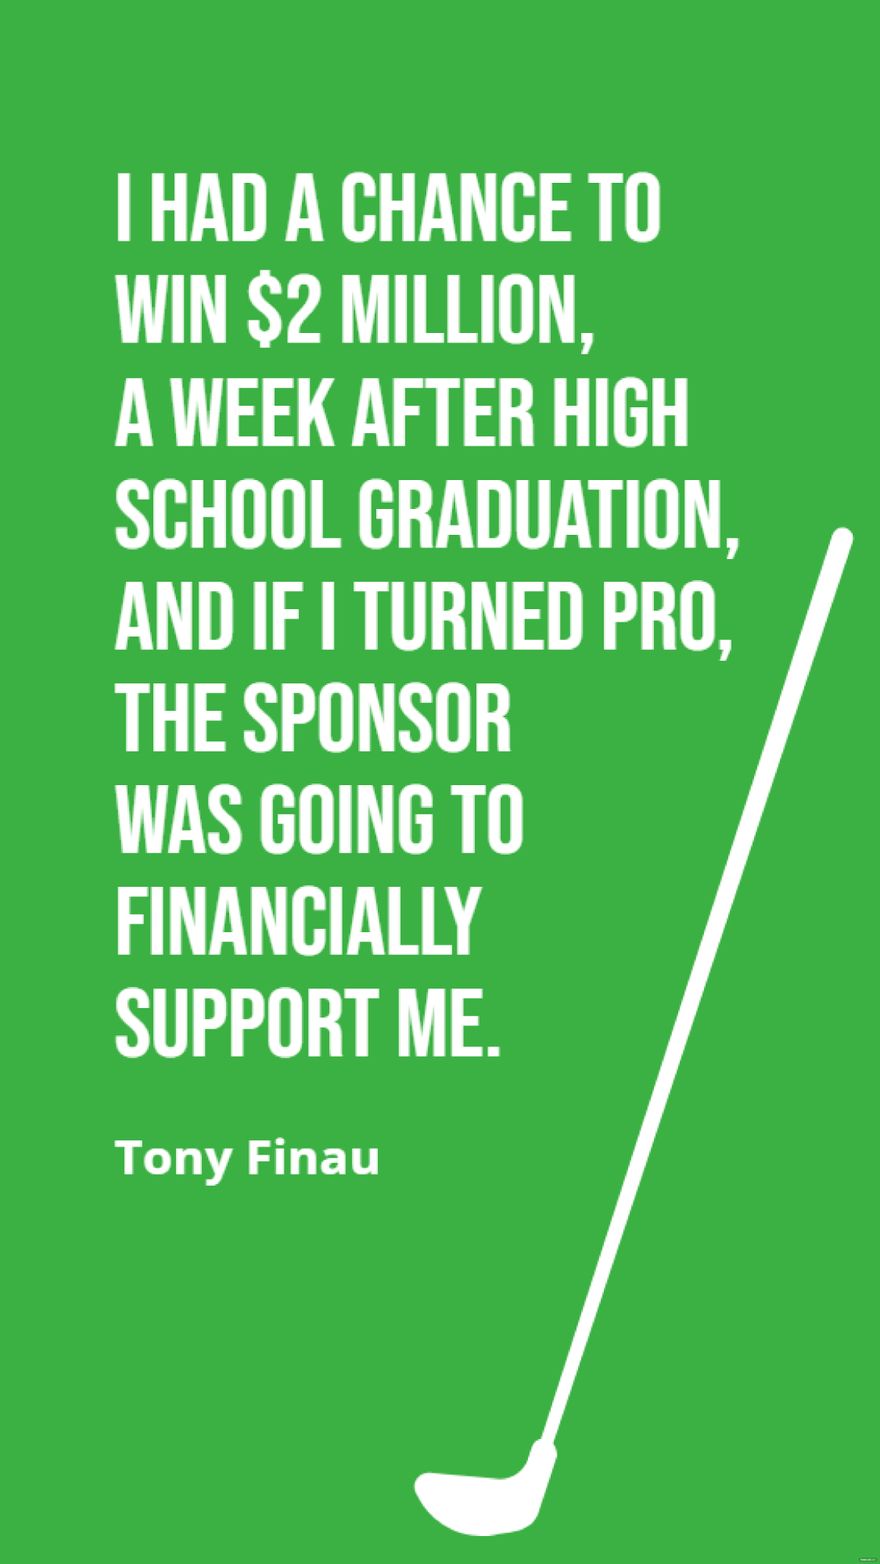 Tony Finau - I had a chance to win $2 million, a week after high school graduation, and if I turned pro, the sponsor was going to financially support me.